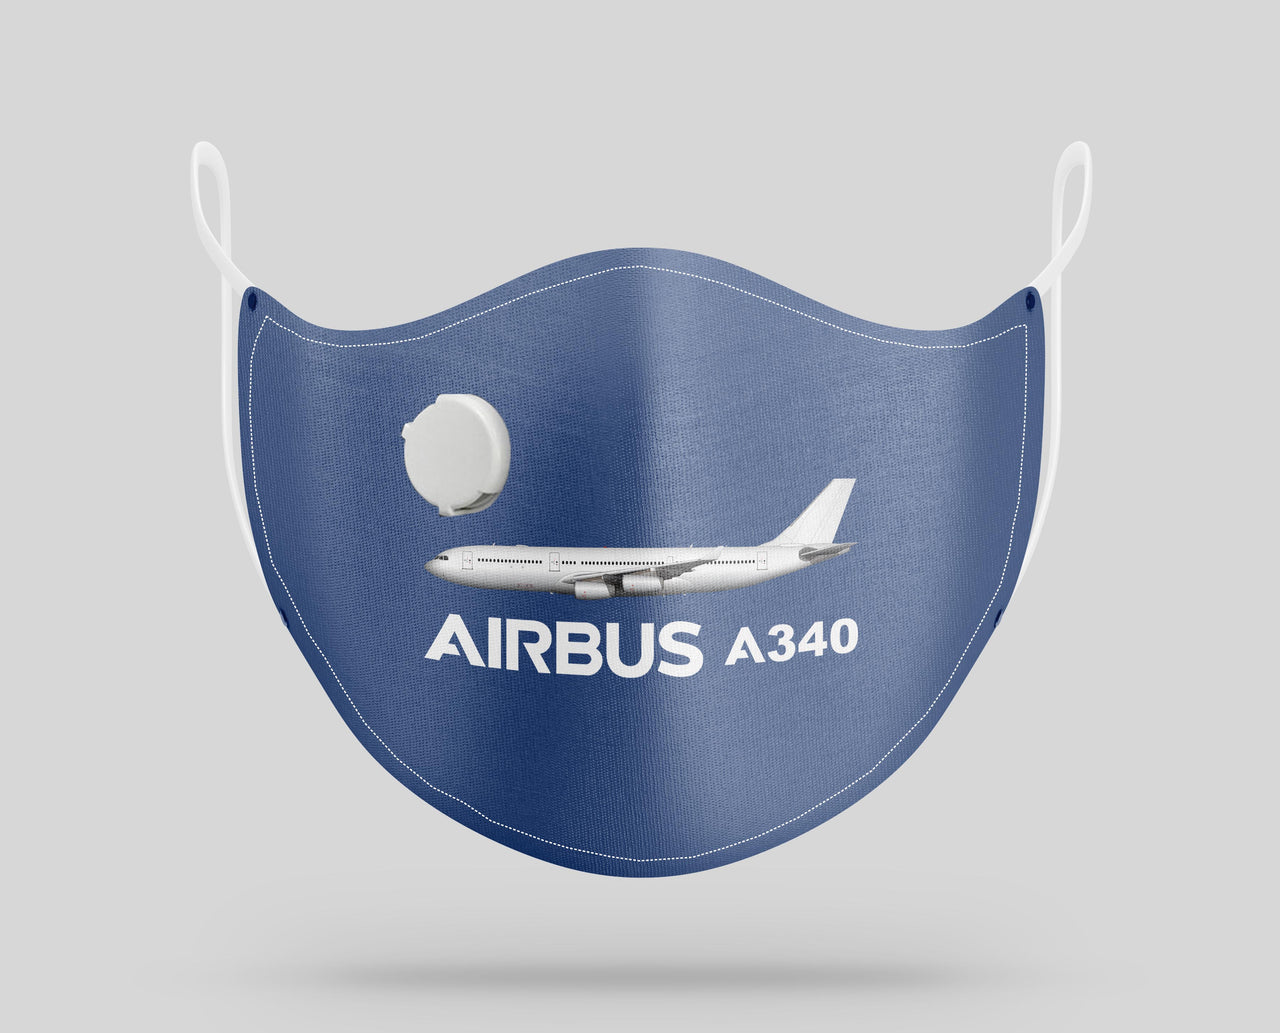 The Airbus A340 Designed Face Masks